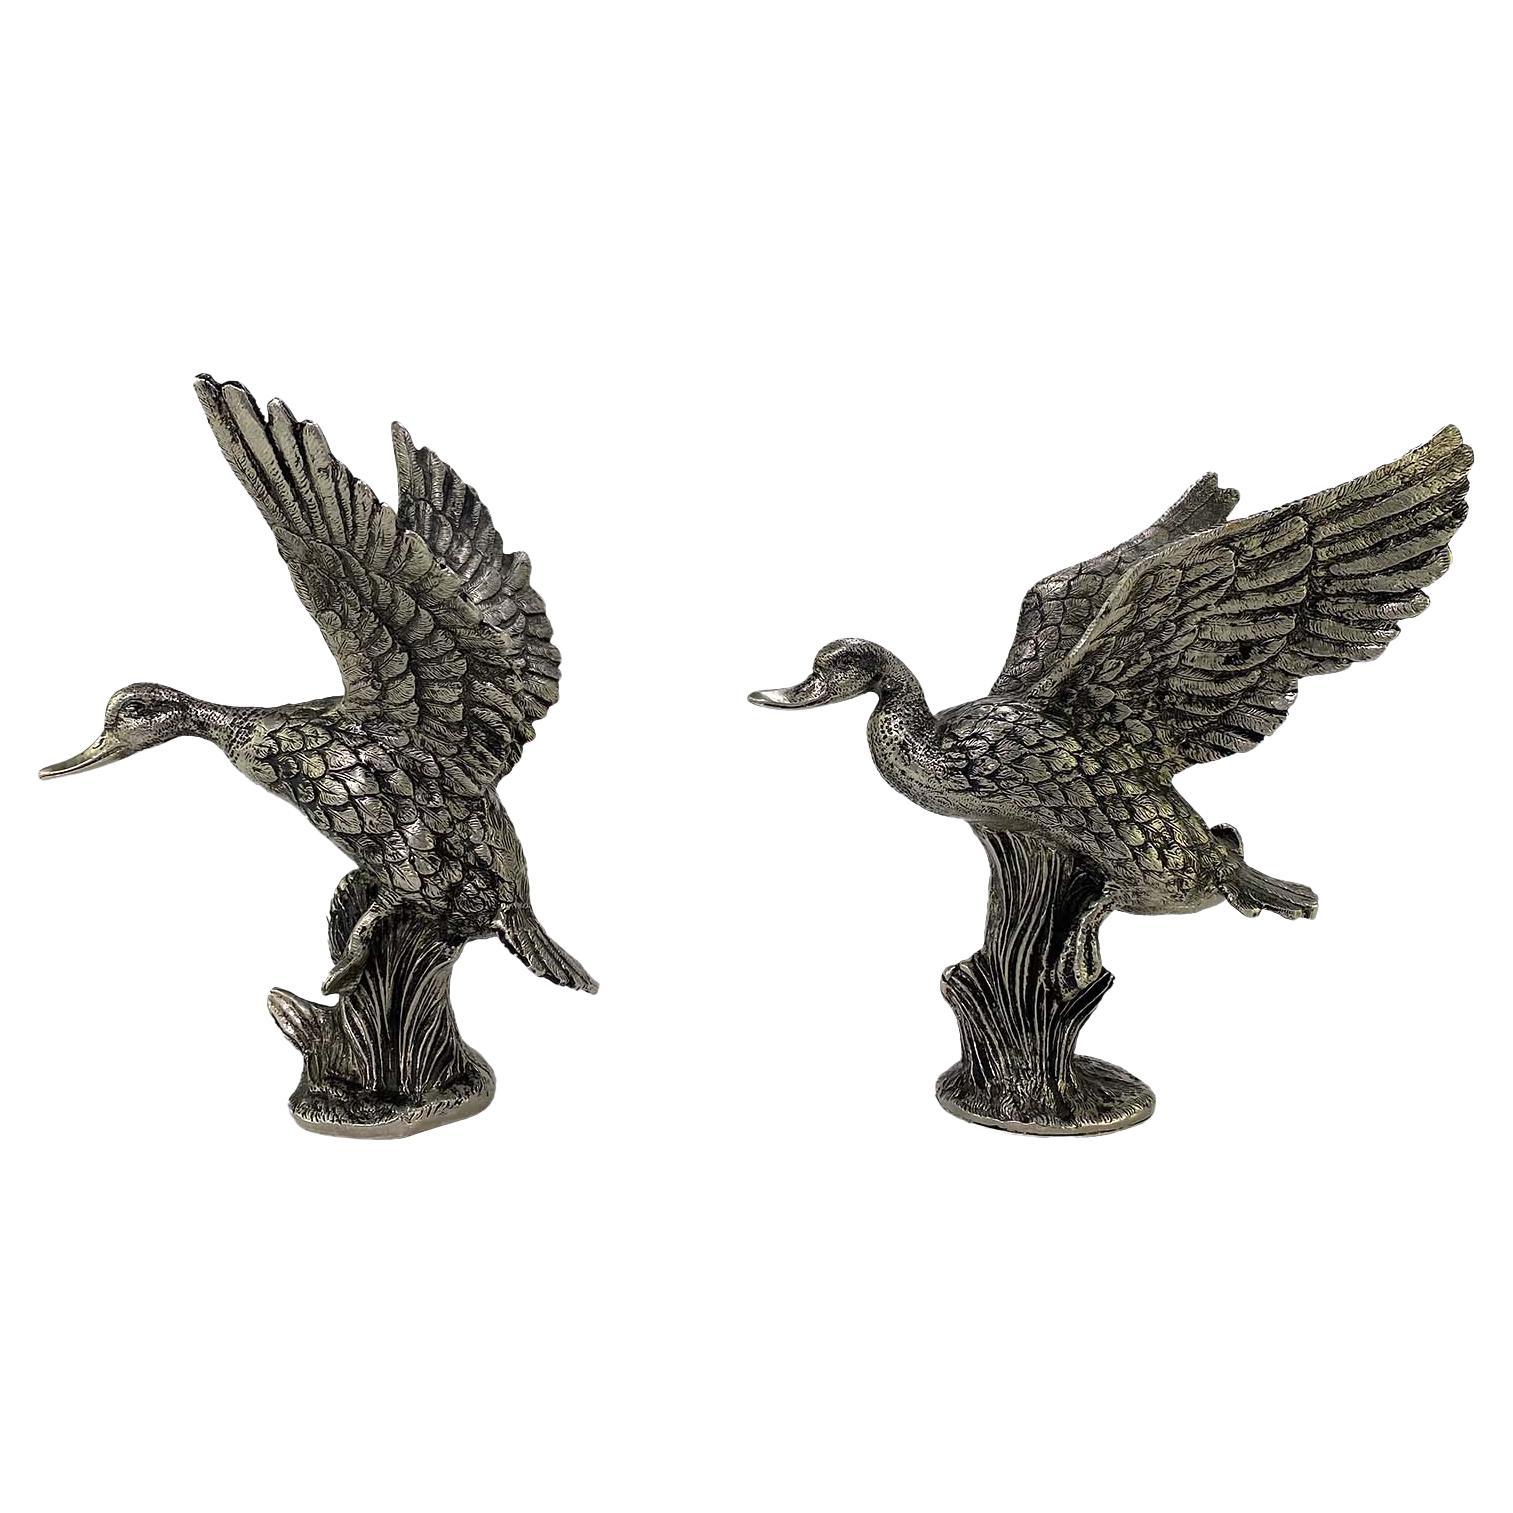 Presenting a set of silver mallard duck sculptures from the 1970s. The metal models take the country and equestrian influences of early Gucci and elevate them making them chic and shiny. These statues feature two different ducks taking flight in